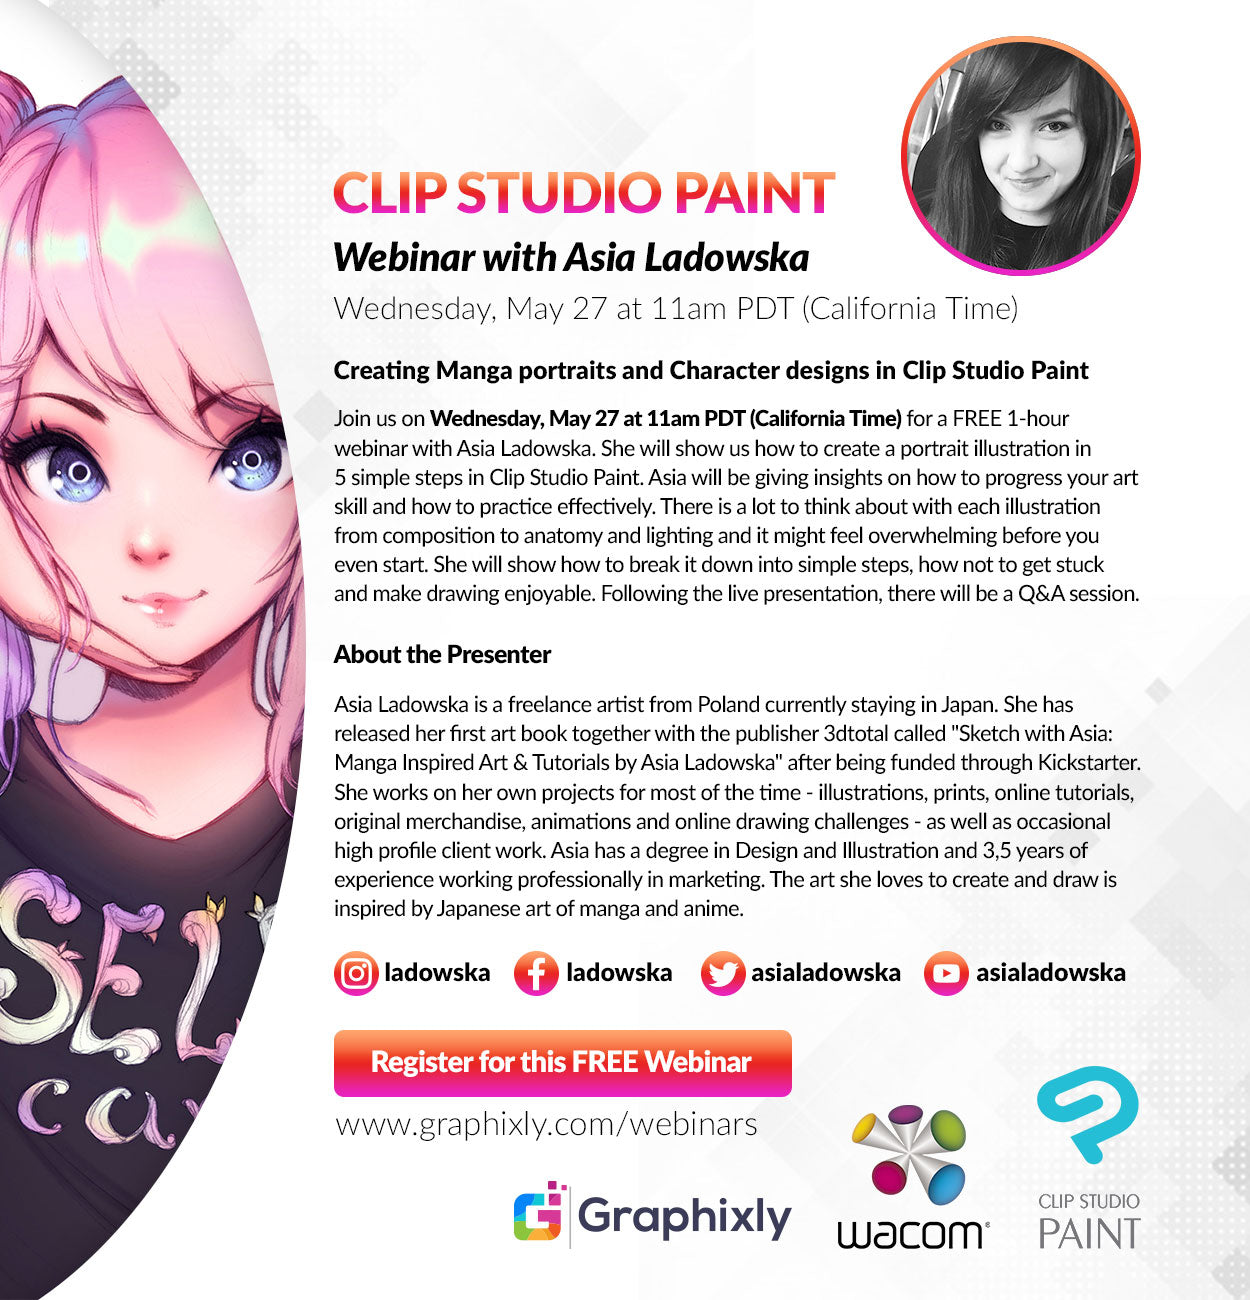 Webinar - “Creating Manga portraits and Character designs in Clip Studio Paint” with Asia Ladowska